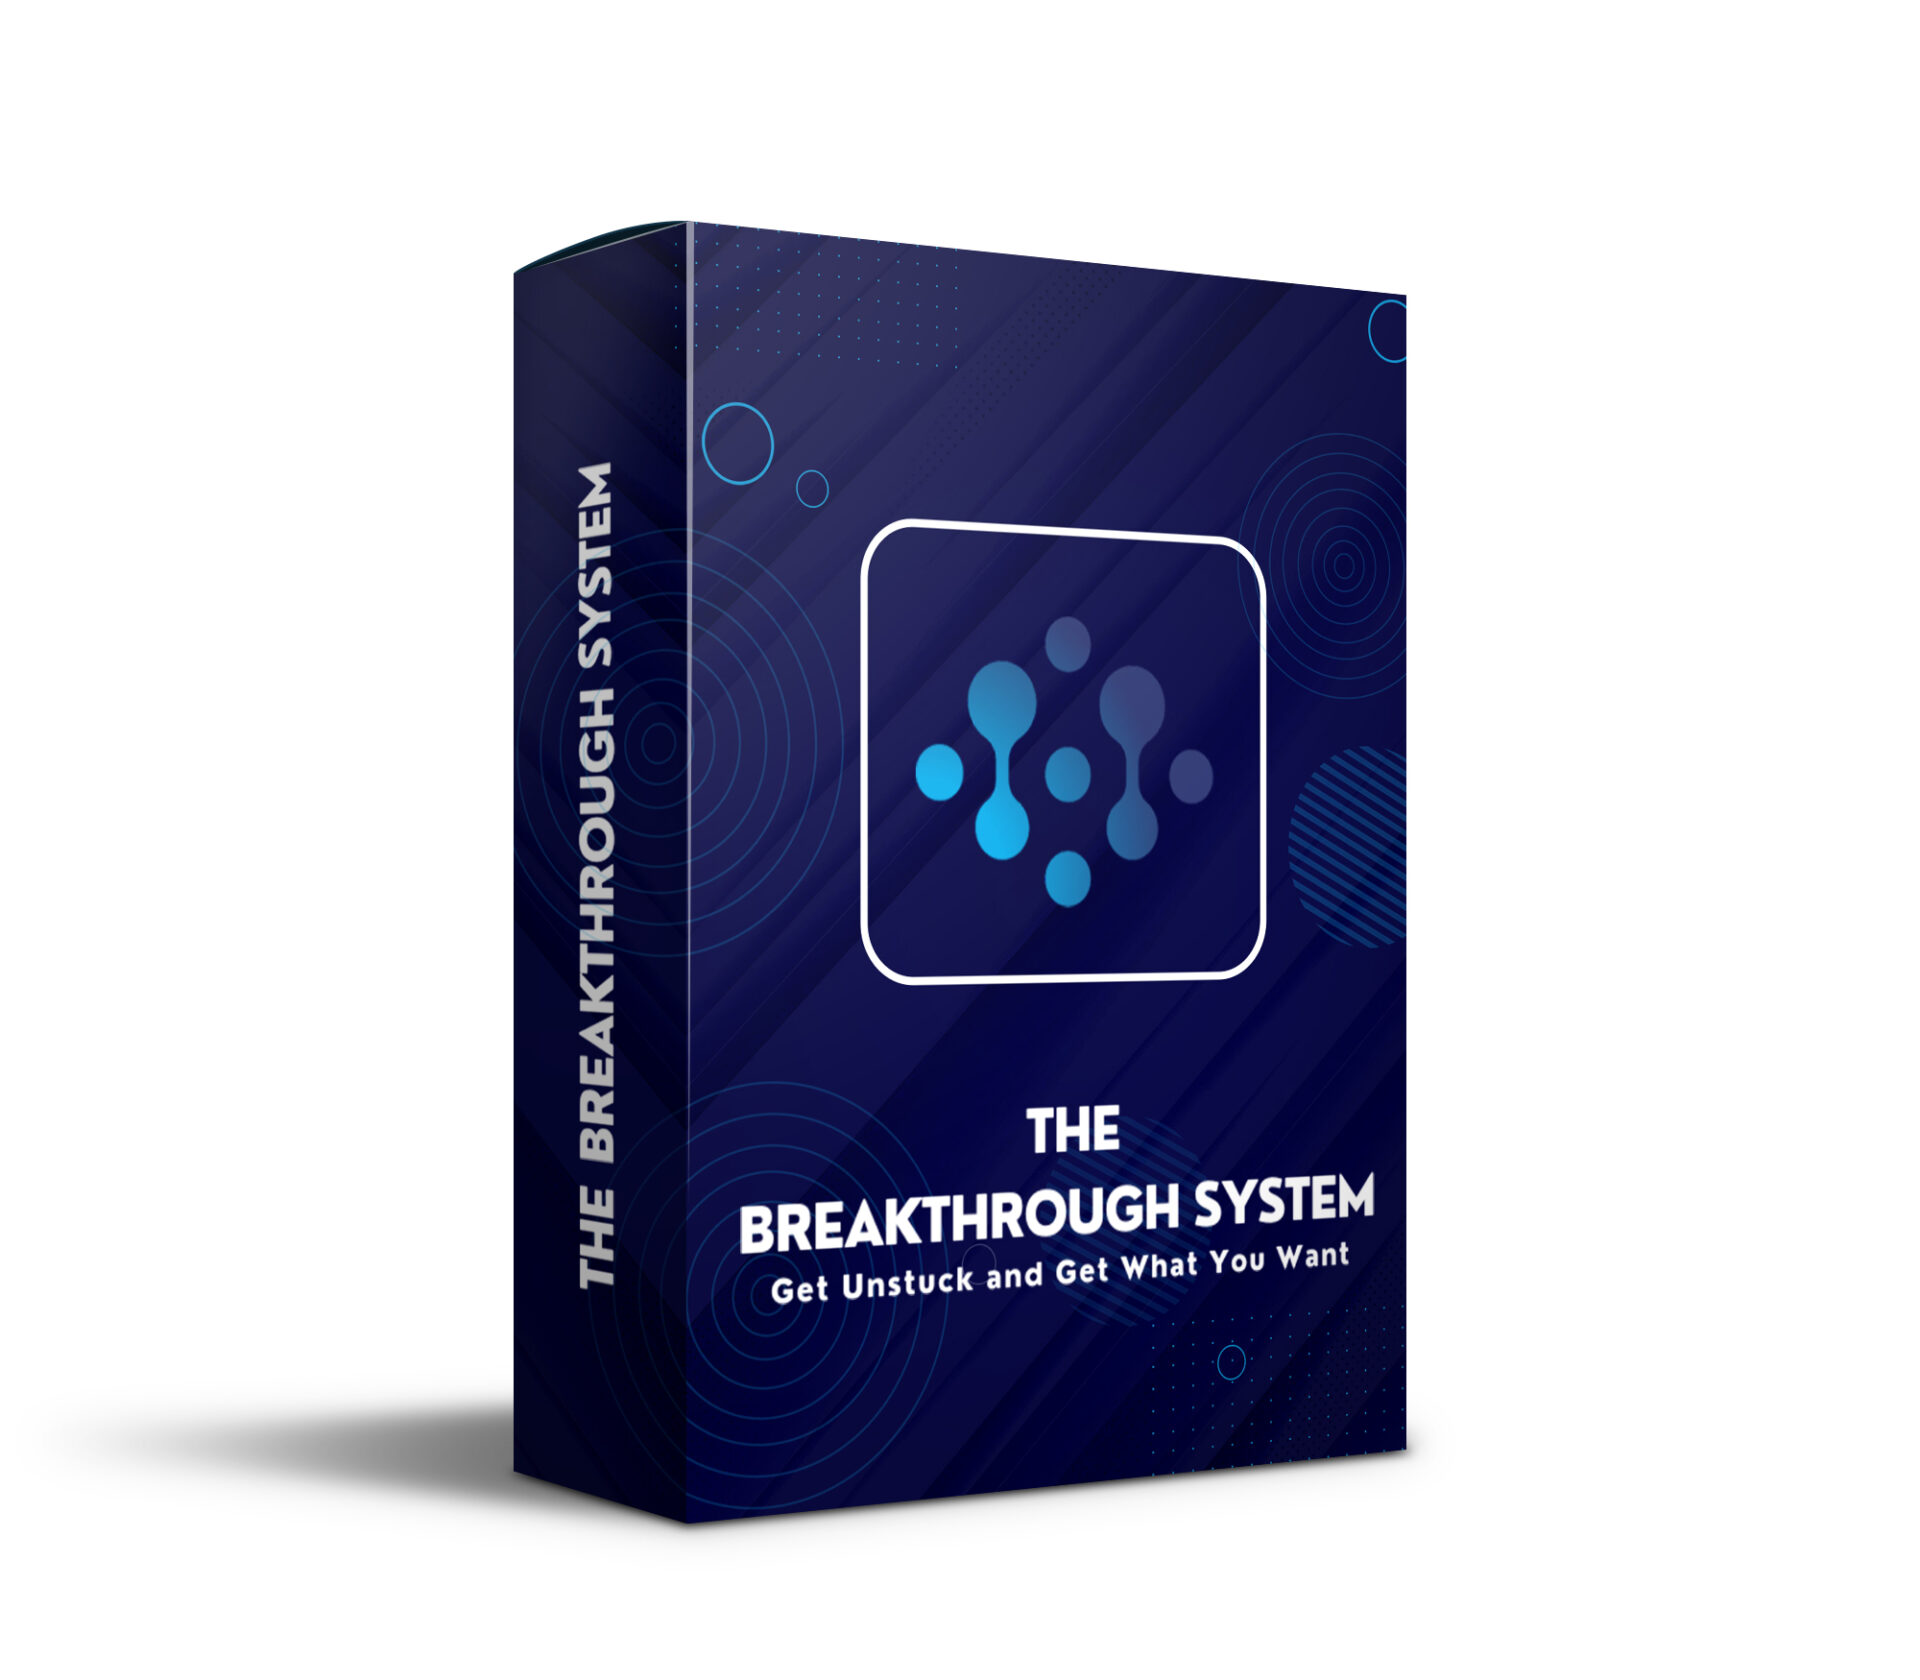 The Breakthrough System Product Box